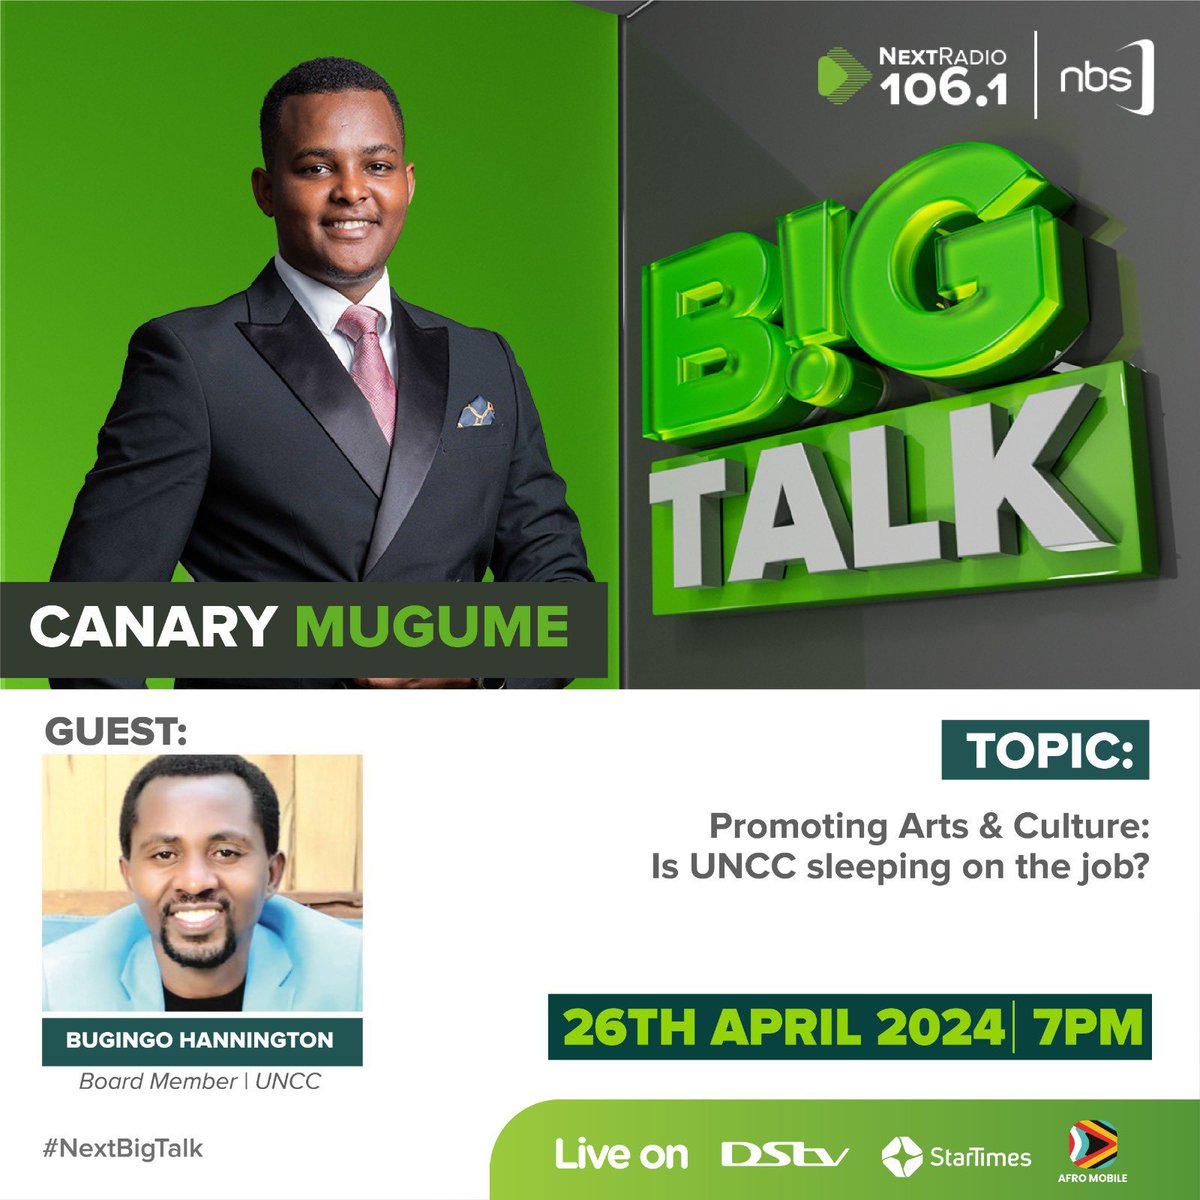 I will be joining @CanaryMugume this evening on @nextradio_ug to Discuss Arts & Culture! Tune in at exactly 7pm tonight and we empower each other's brains 🧠